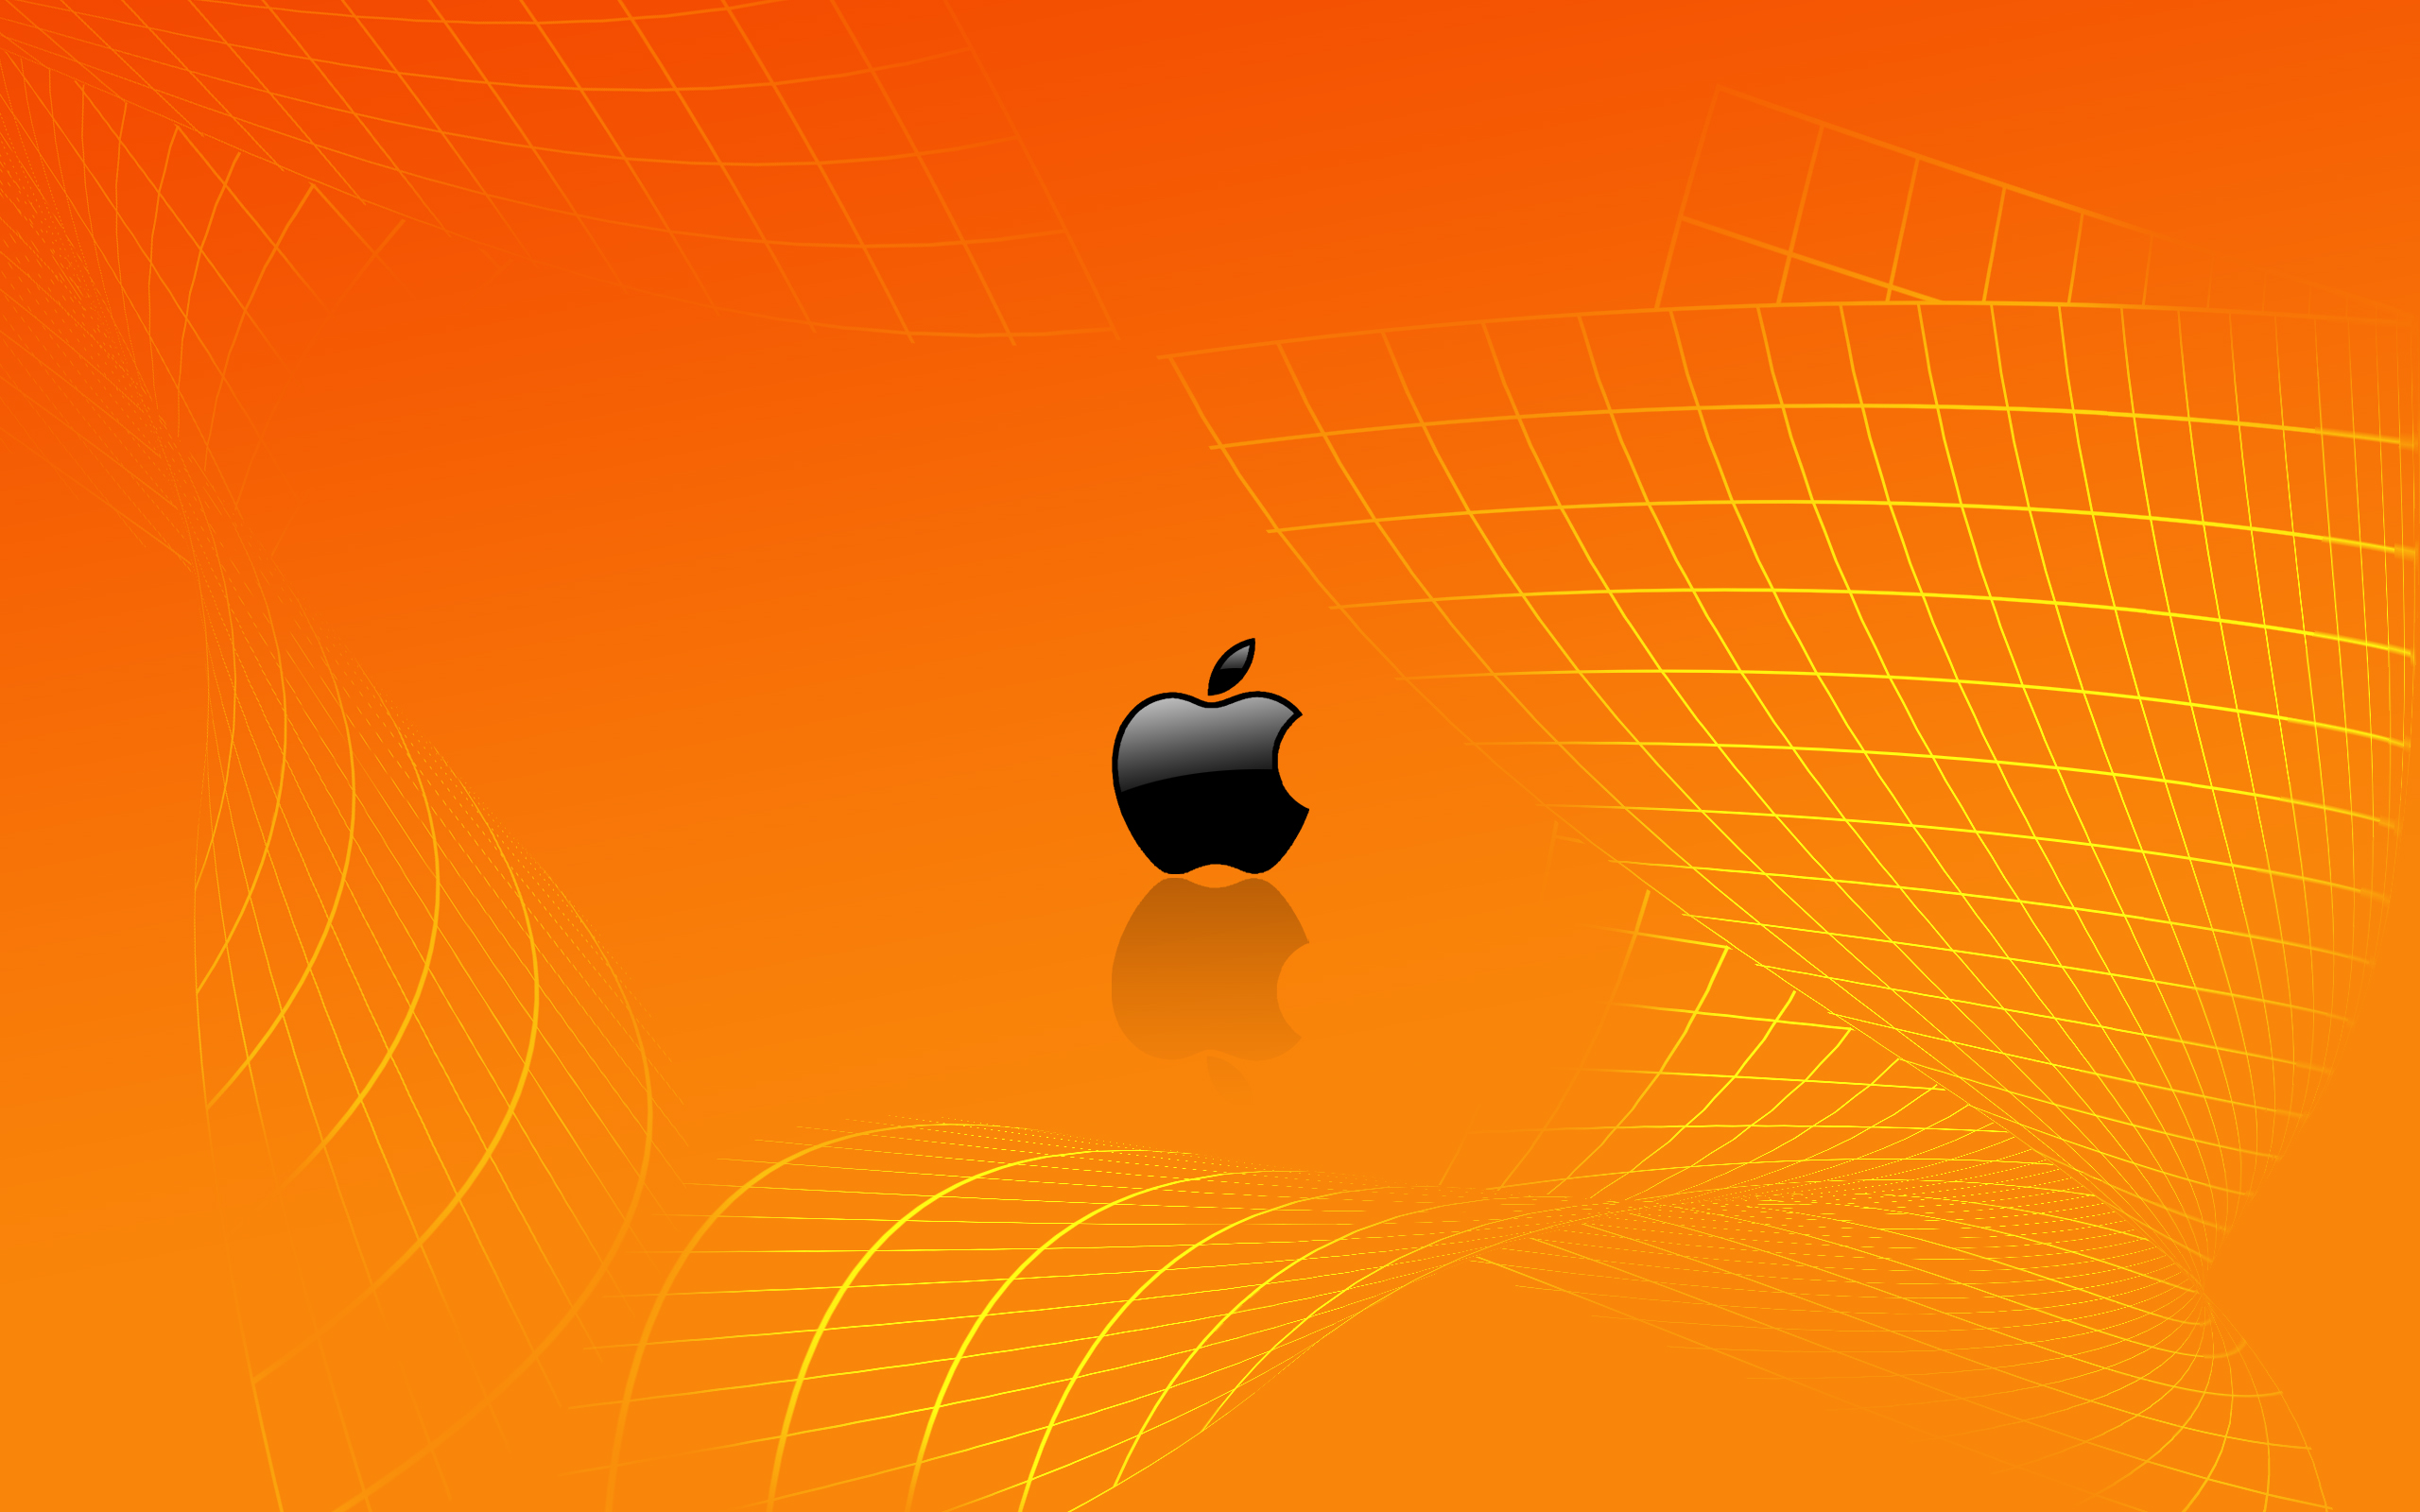 This site has some really cool apple wallpapers, tips, even leopard inspired 